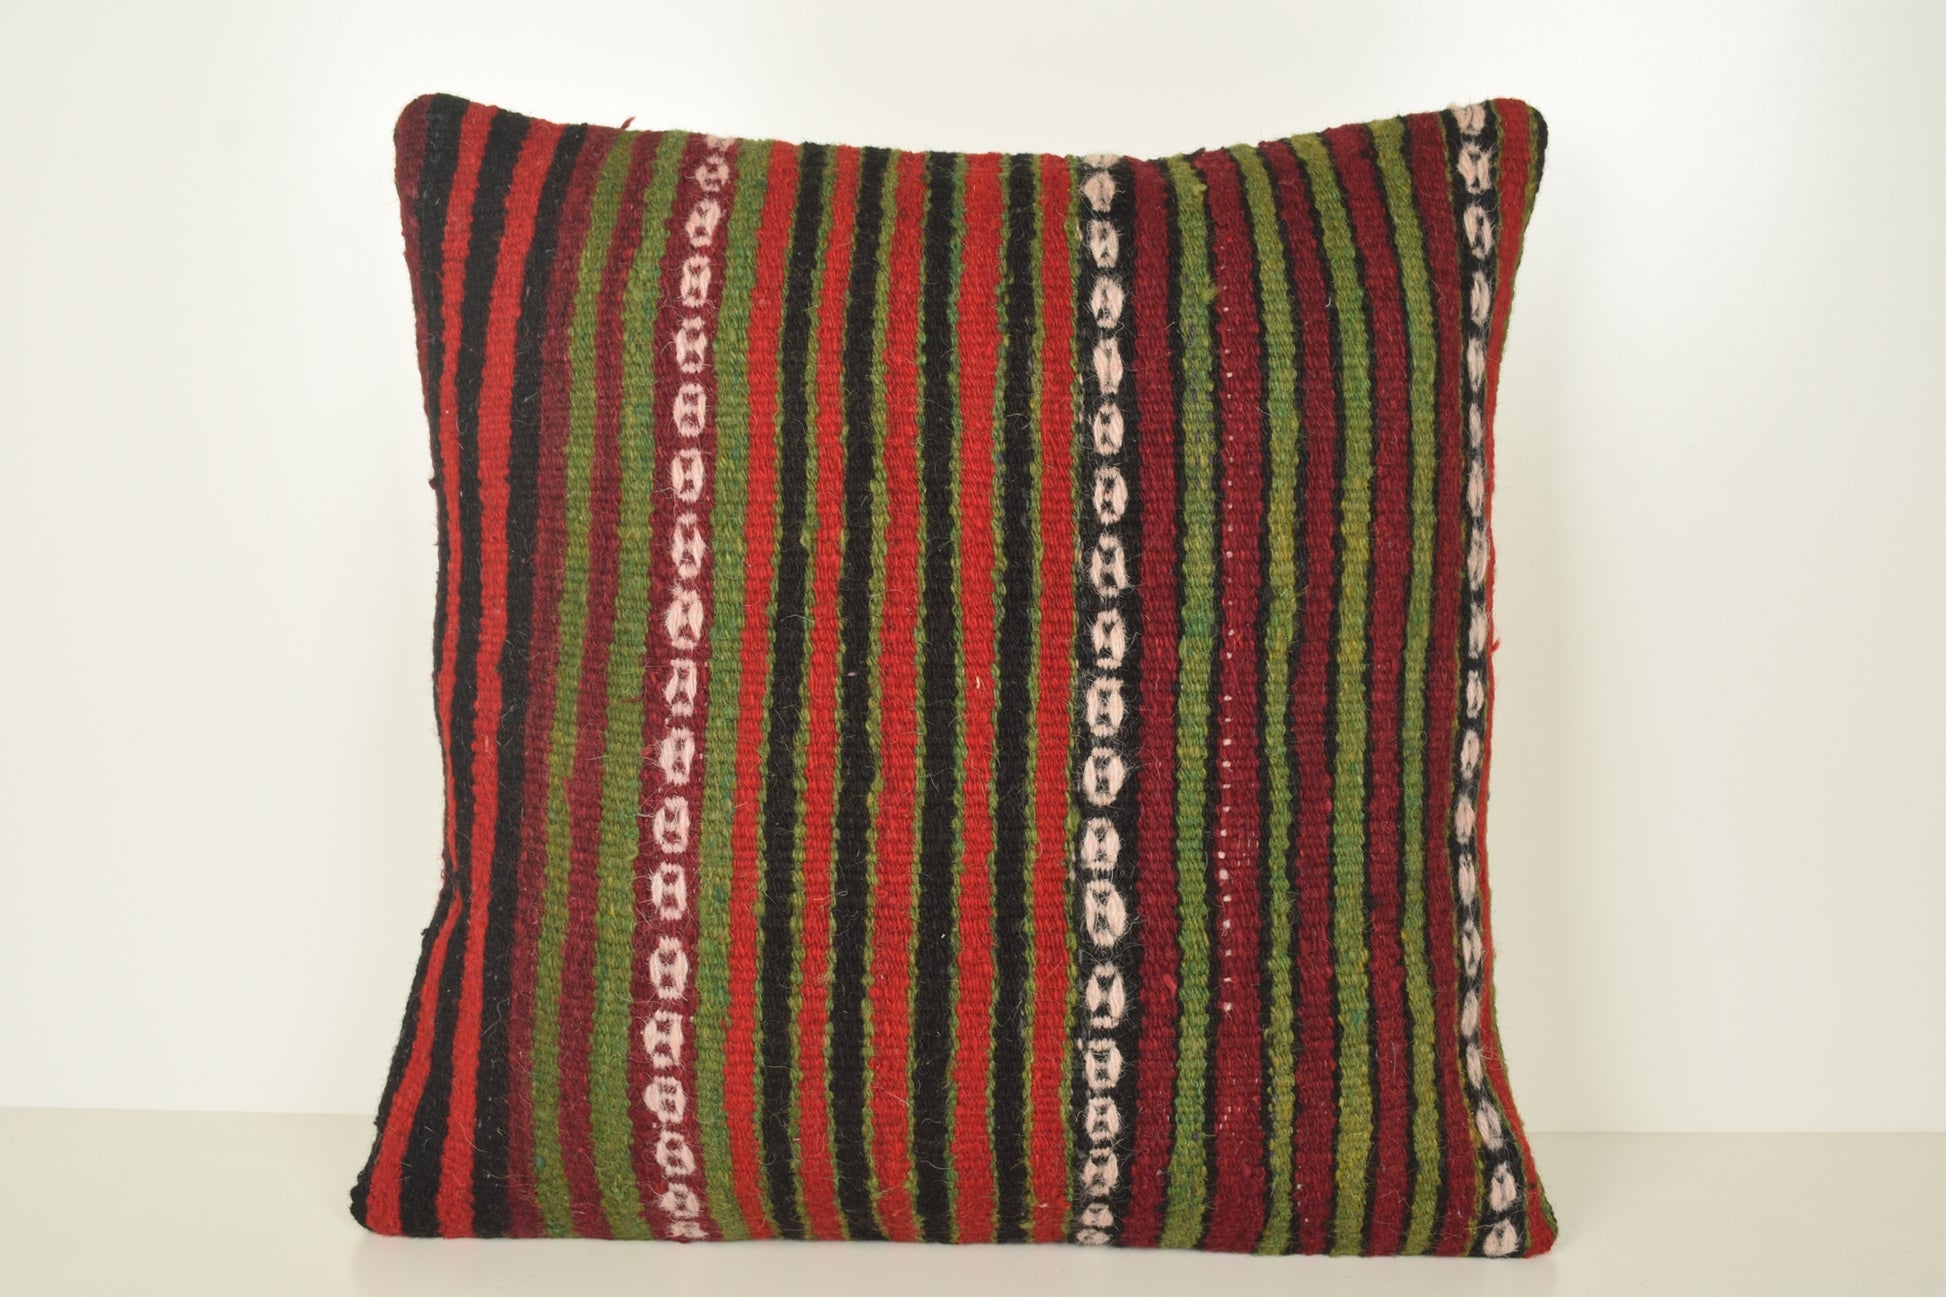 Kilim Pillows from Turkey A00979 24x24 Bench Shabby Chic Cottage